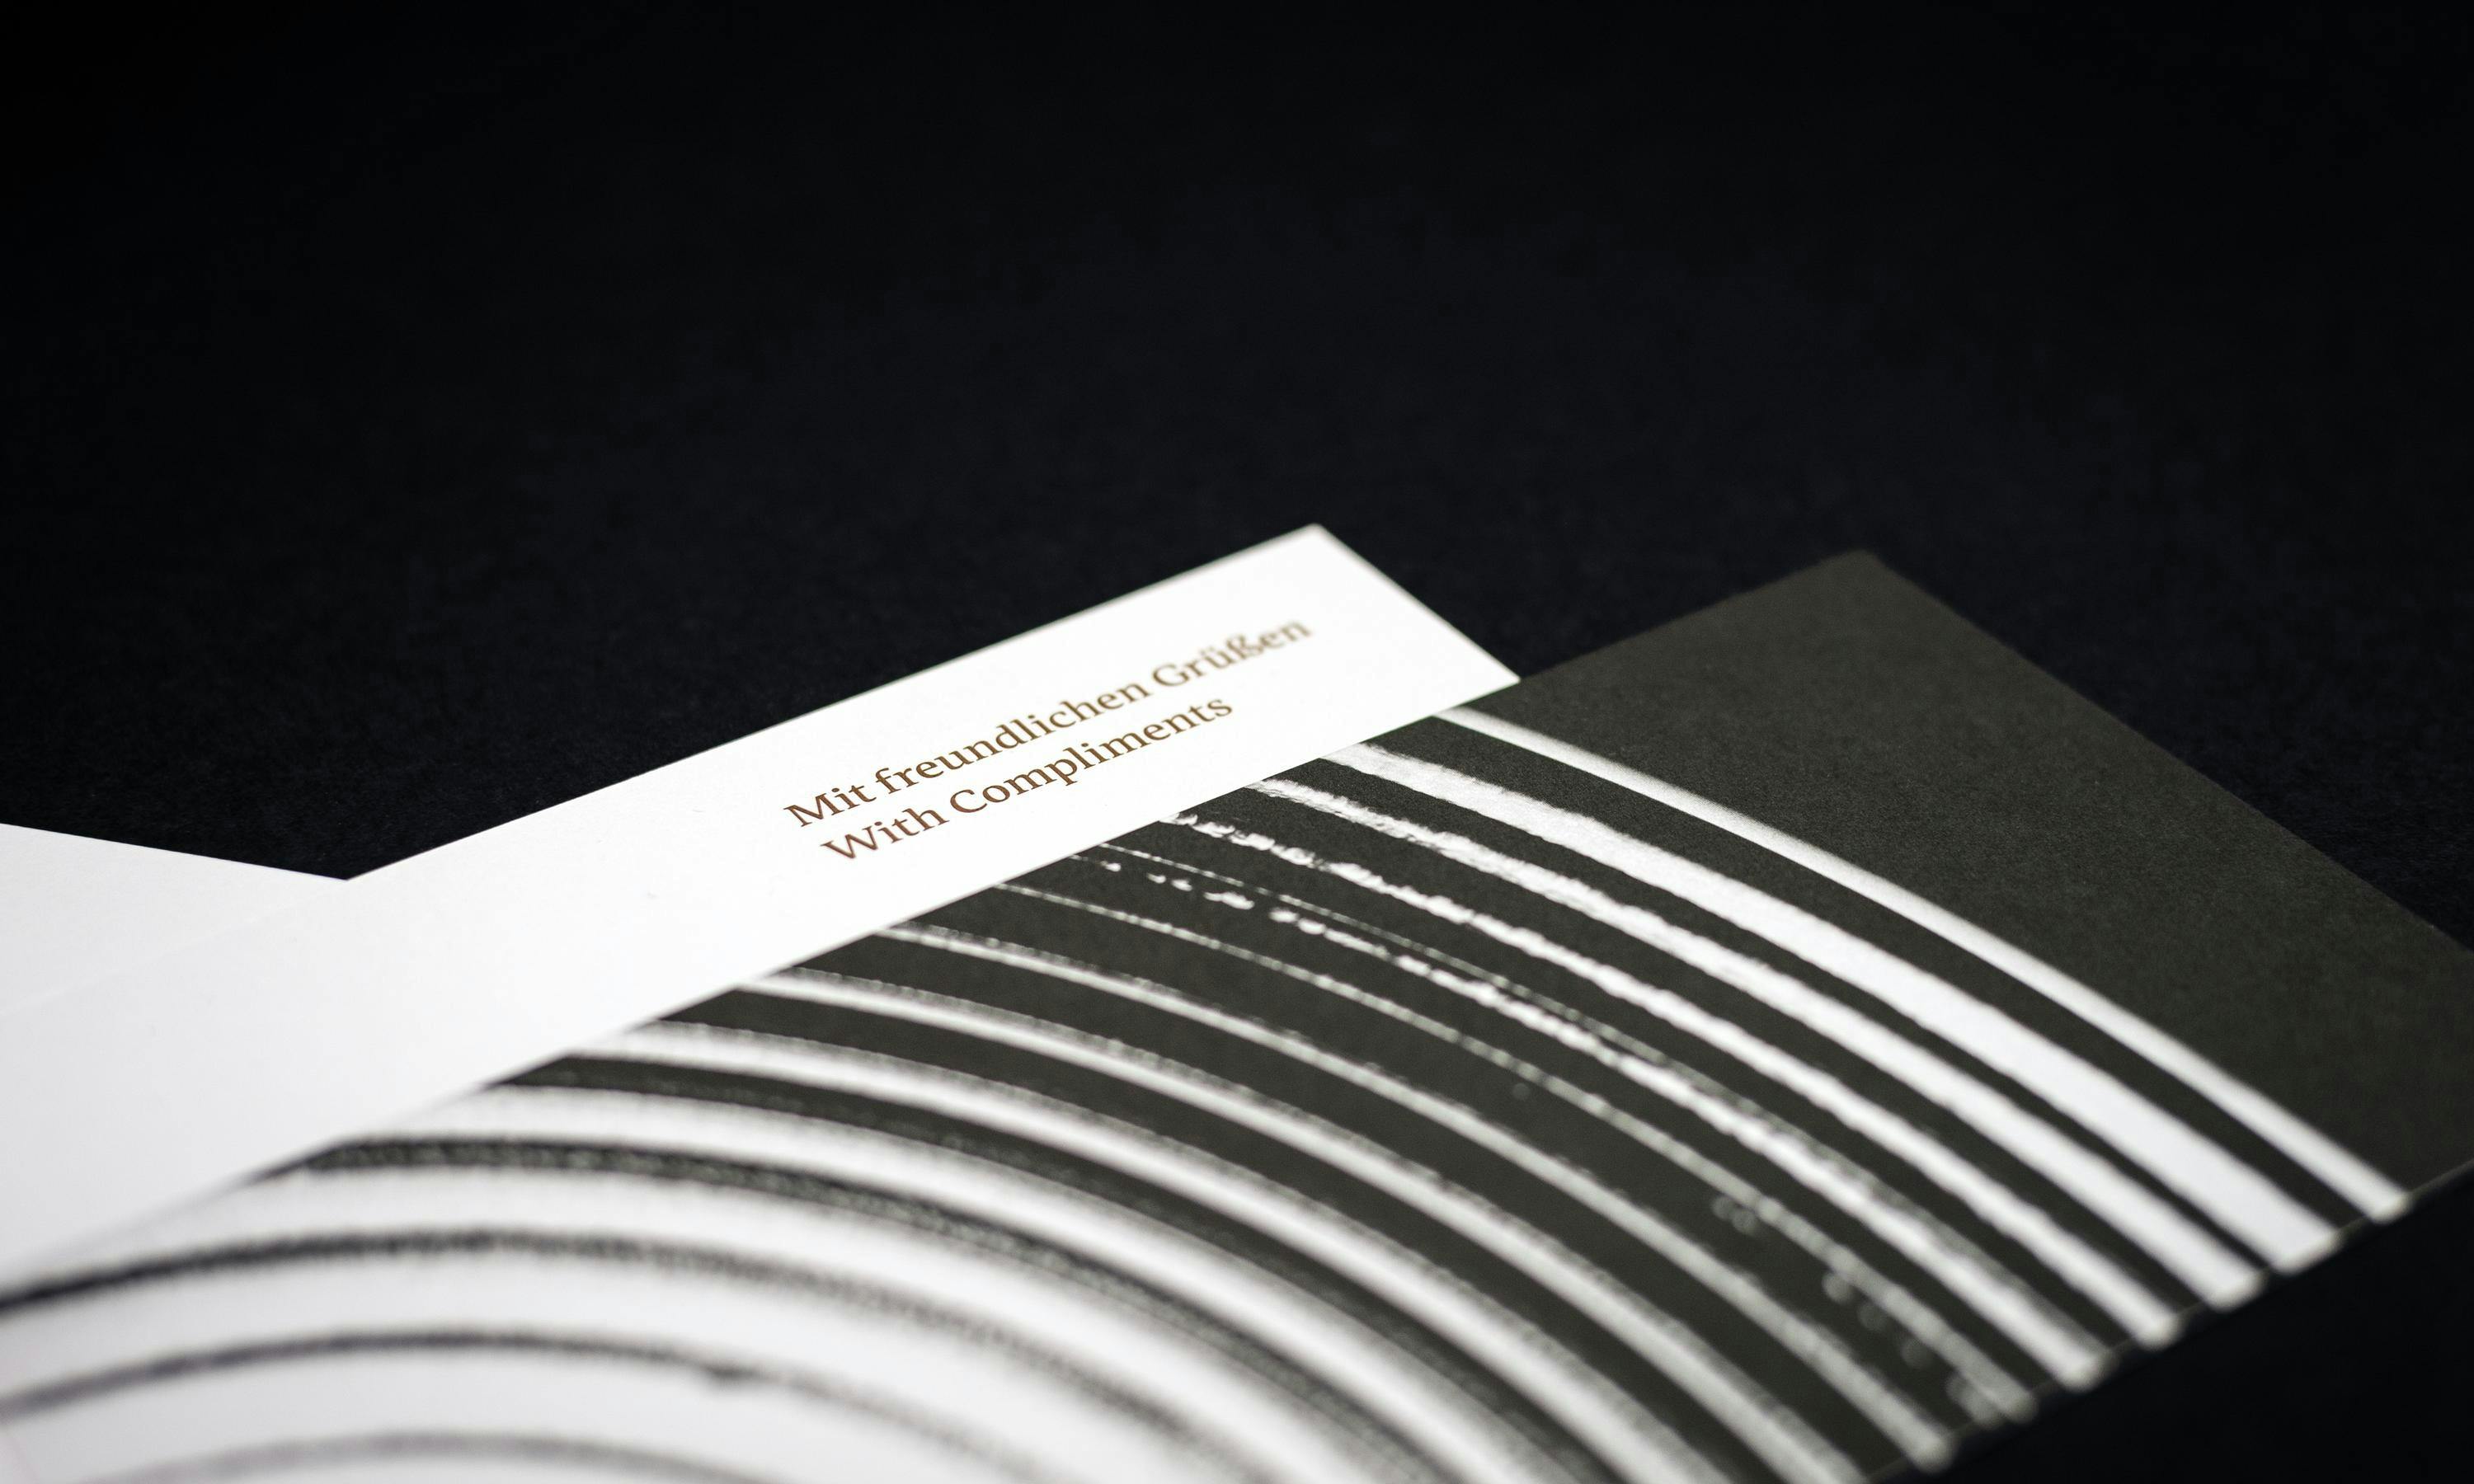 LMG Corporate Design Compliment Cards © Patricia Keckeis